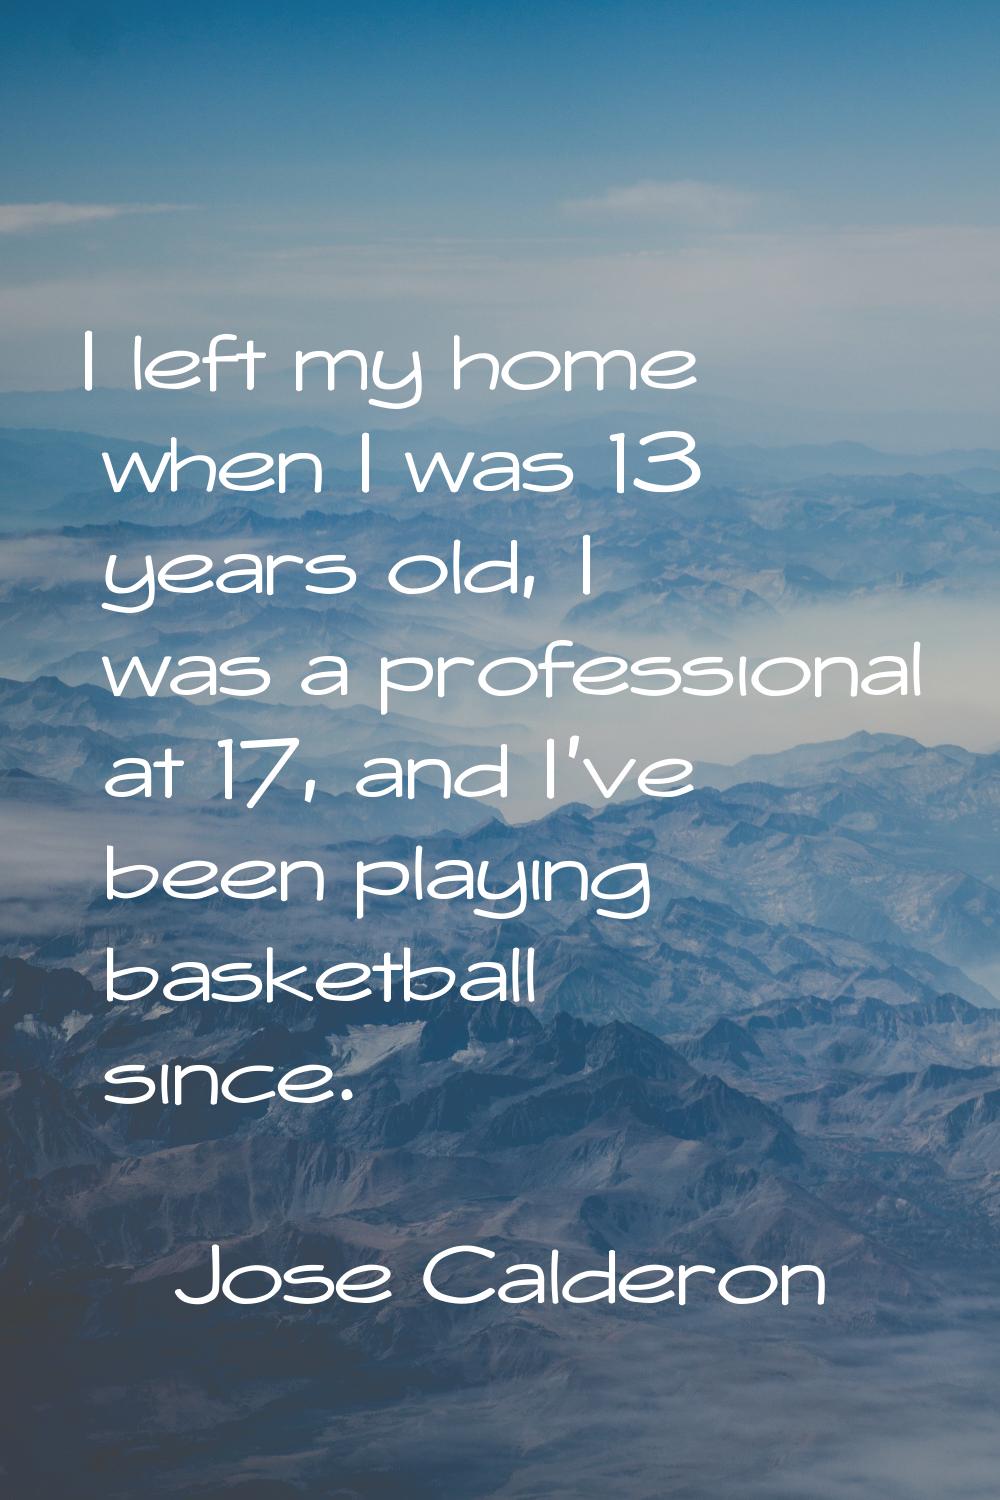 I left my home when I was 13 years old, I was a professional at 17, and I've been playing basketbal